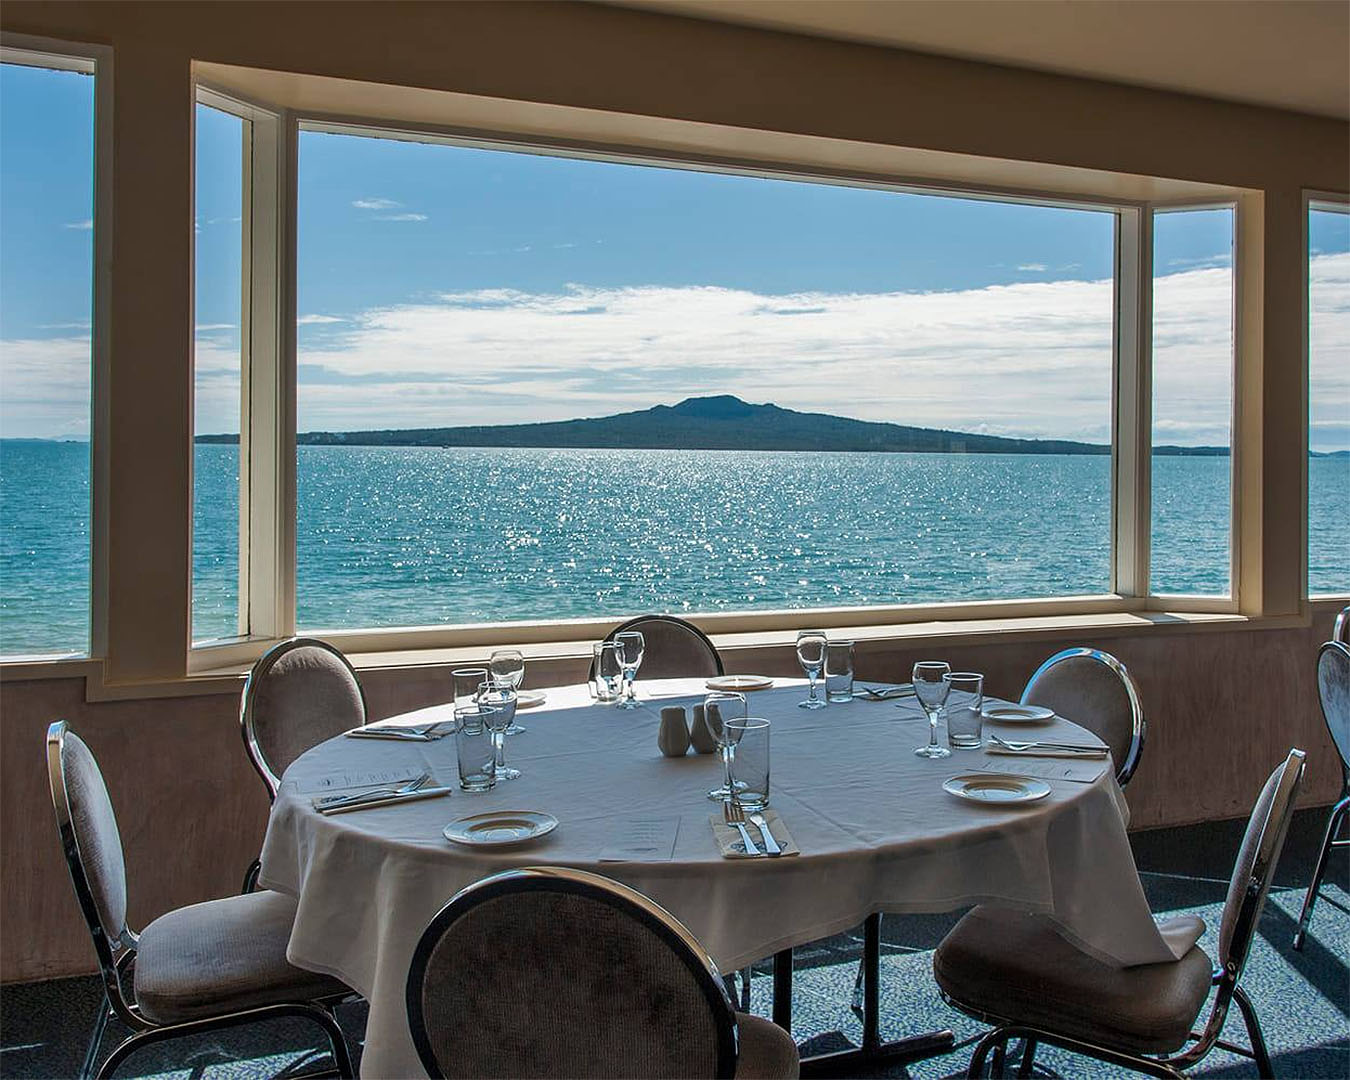 McHugh's Of Cheltenham's stunning dining room looks out to Rangitoto.